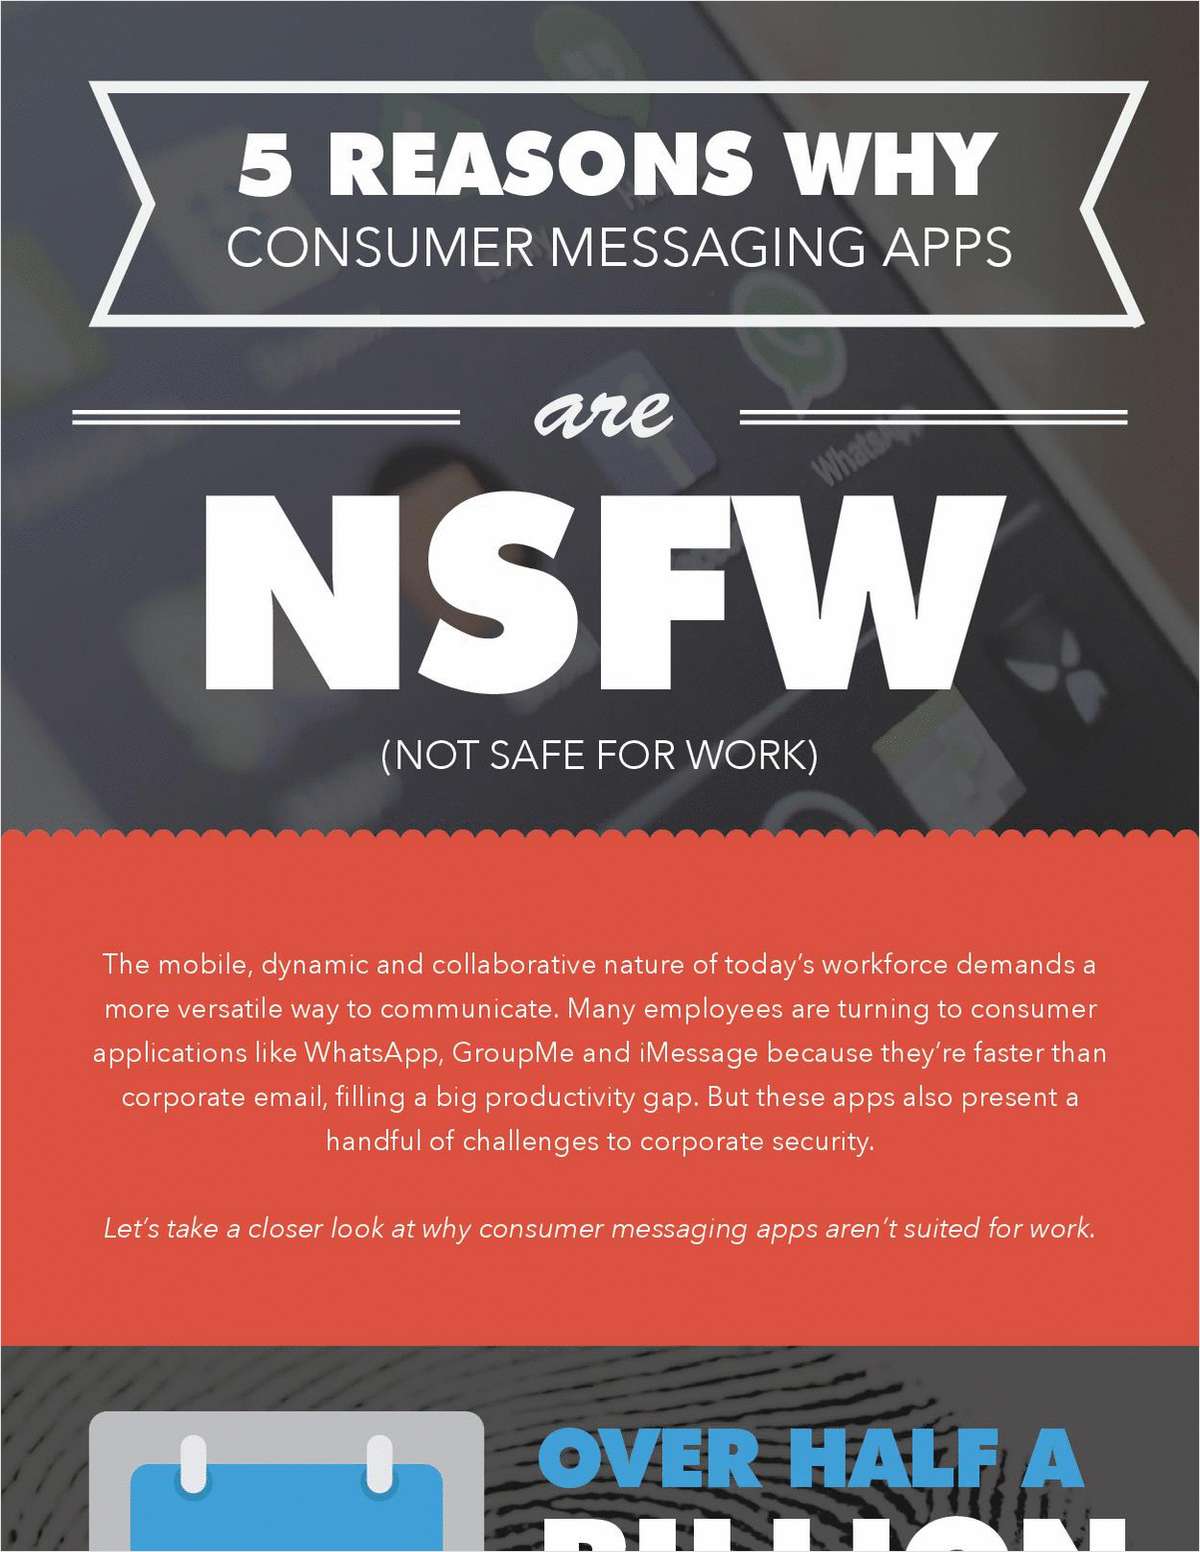 5 Reasons Why Consumer Messaging Apps are NSFW (Not Safe for Work)